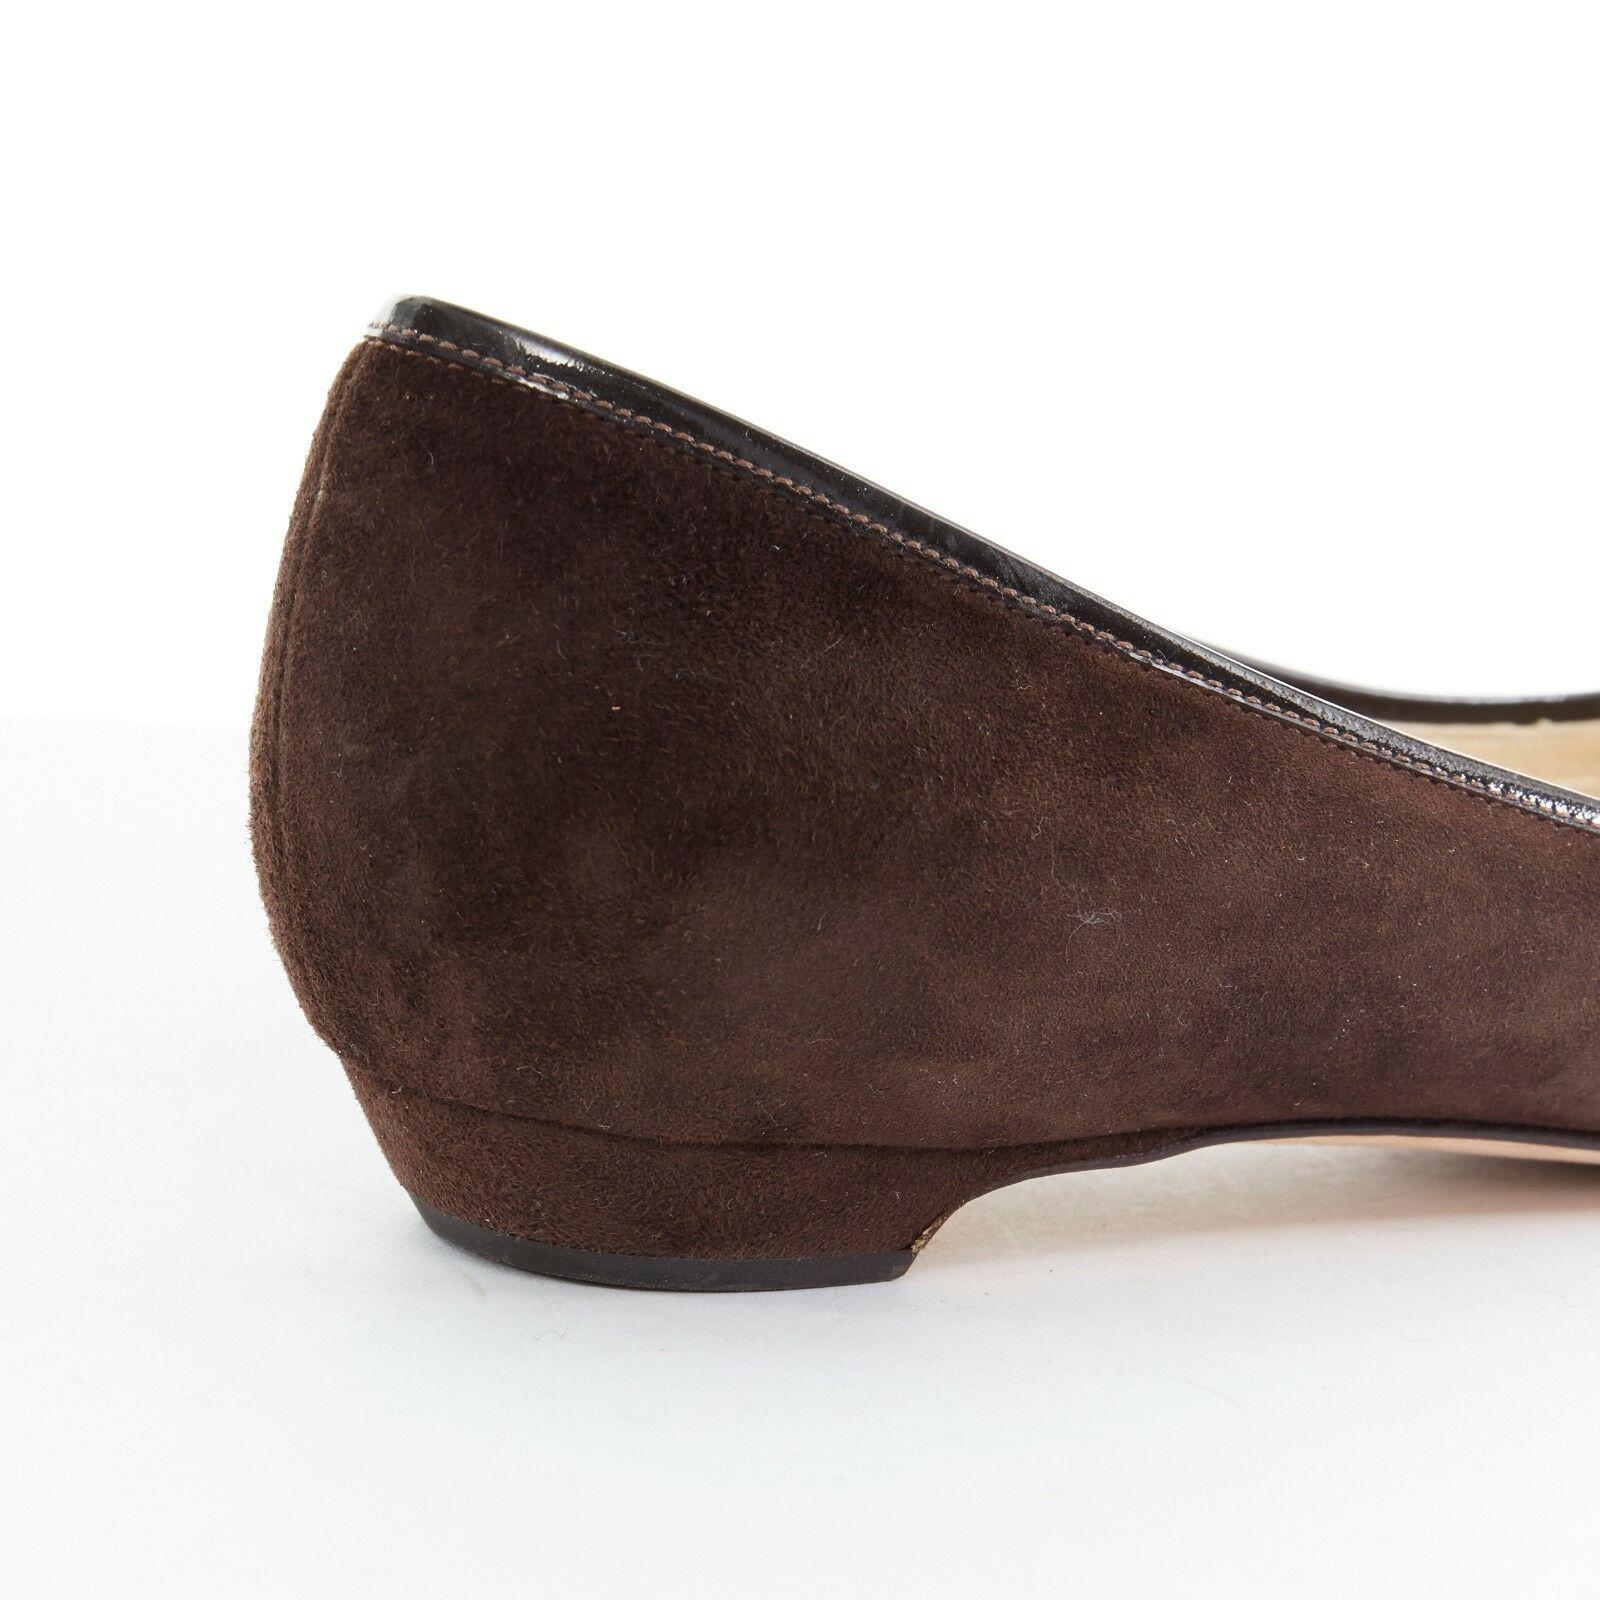 JIMMY CHOO brown suede leather patent detail pointed flat shoes EU37.5 US7.5 3